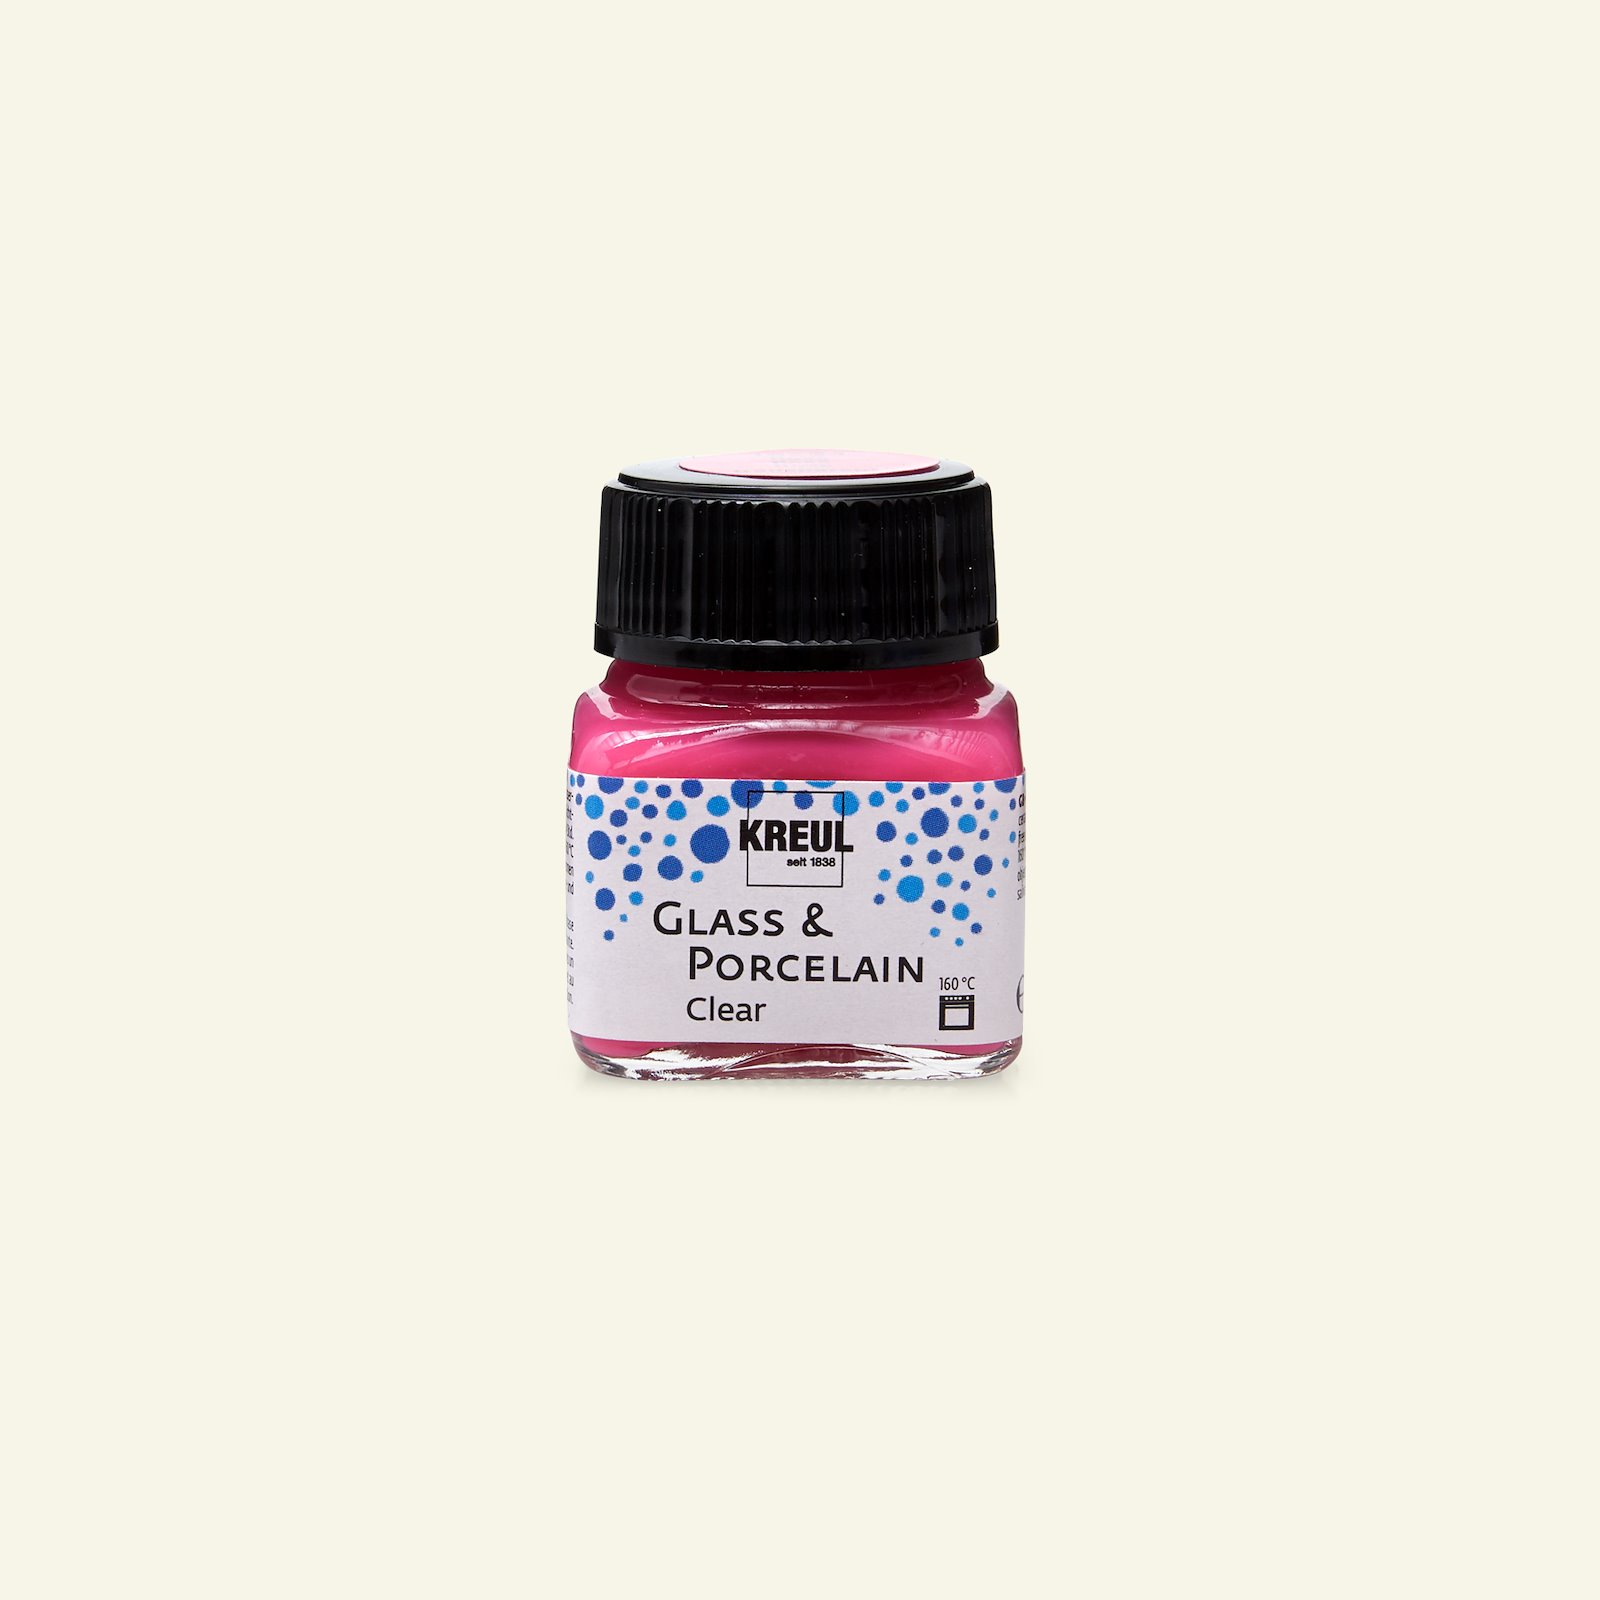 Glass&porcel. paint clear 20ml rose 31284_pack